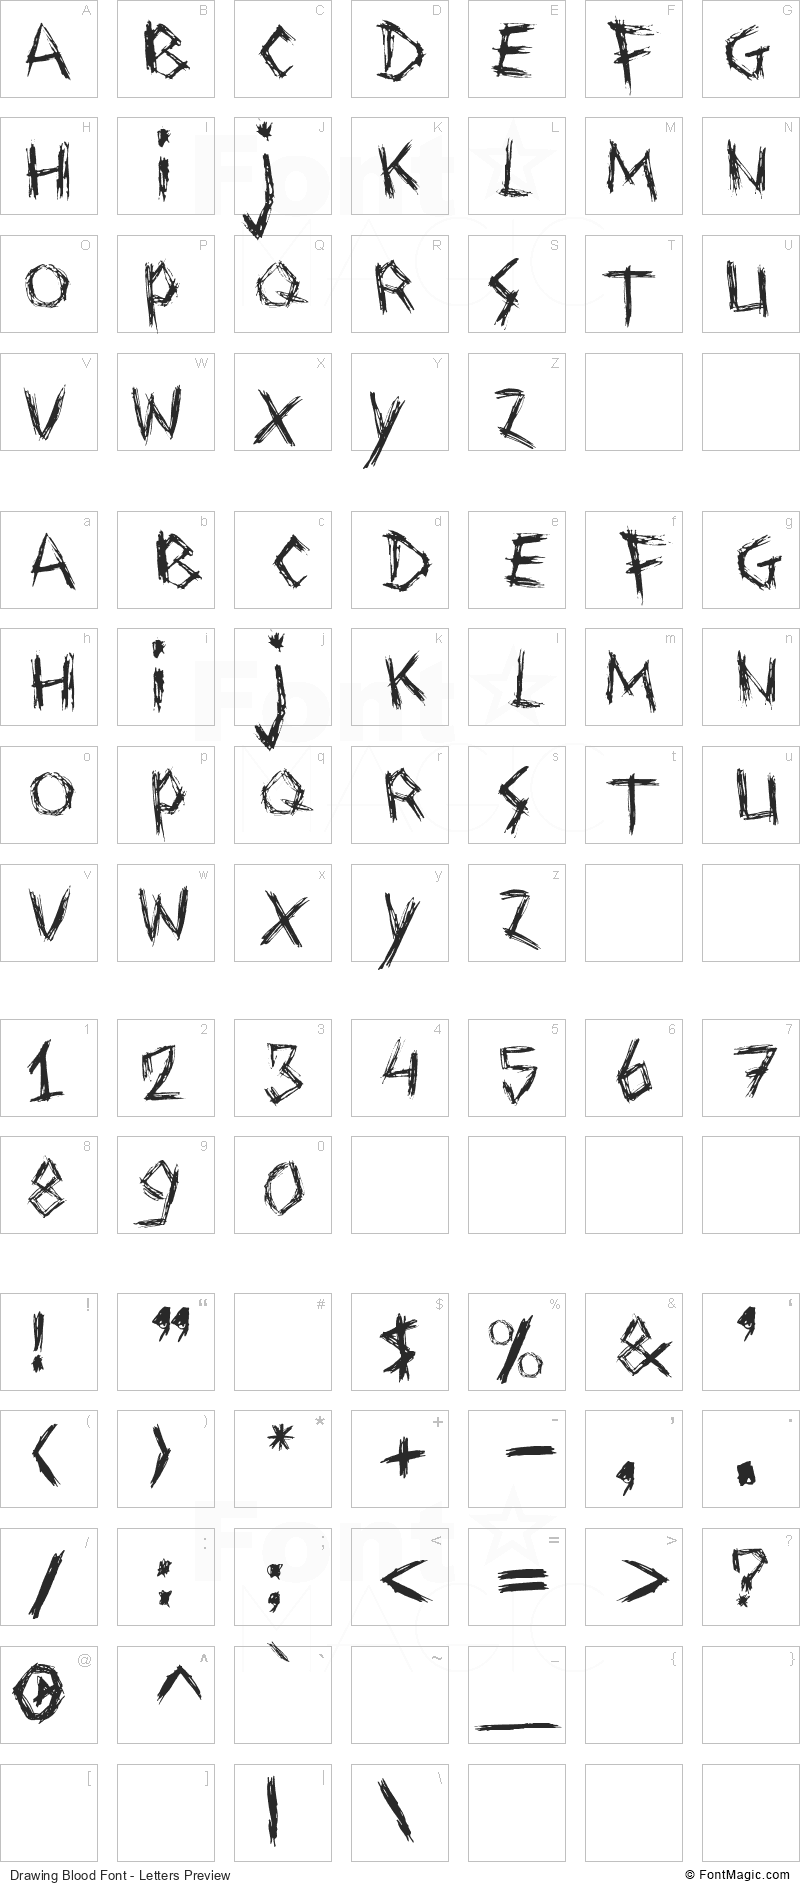 Drawing Blood Font - All Latters Preview Chart